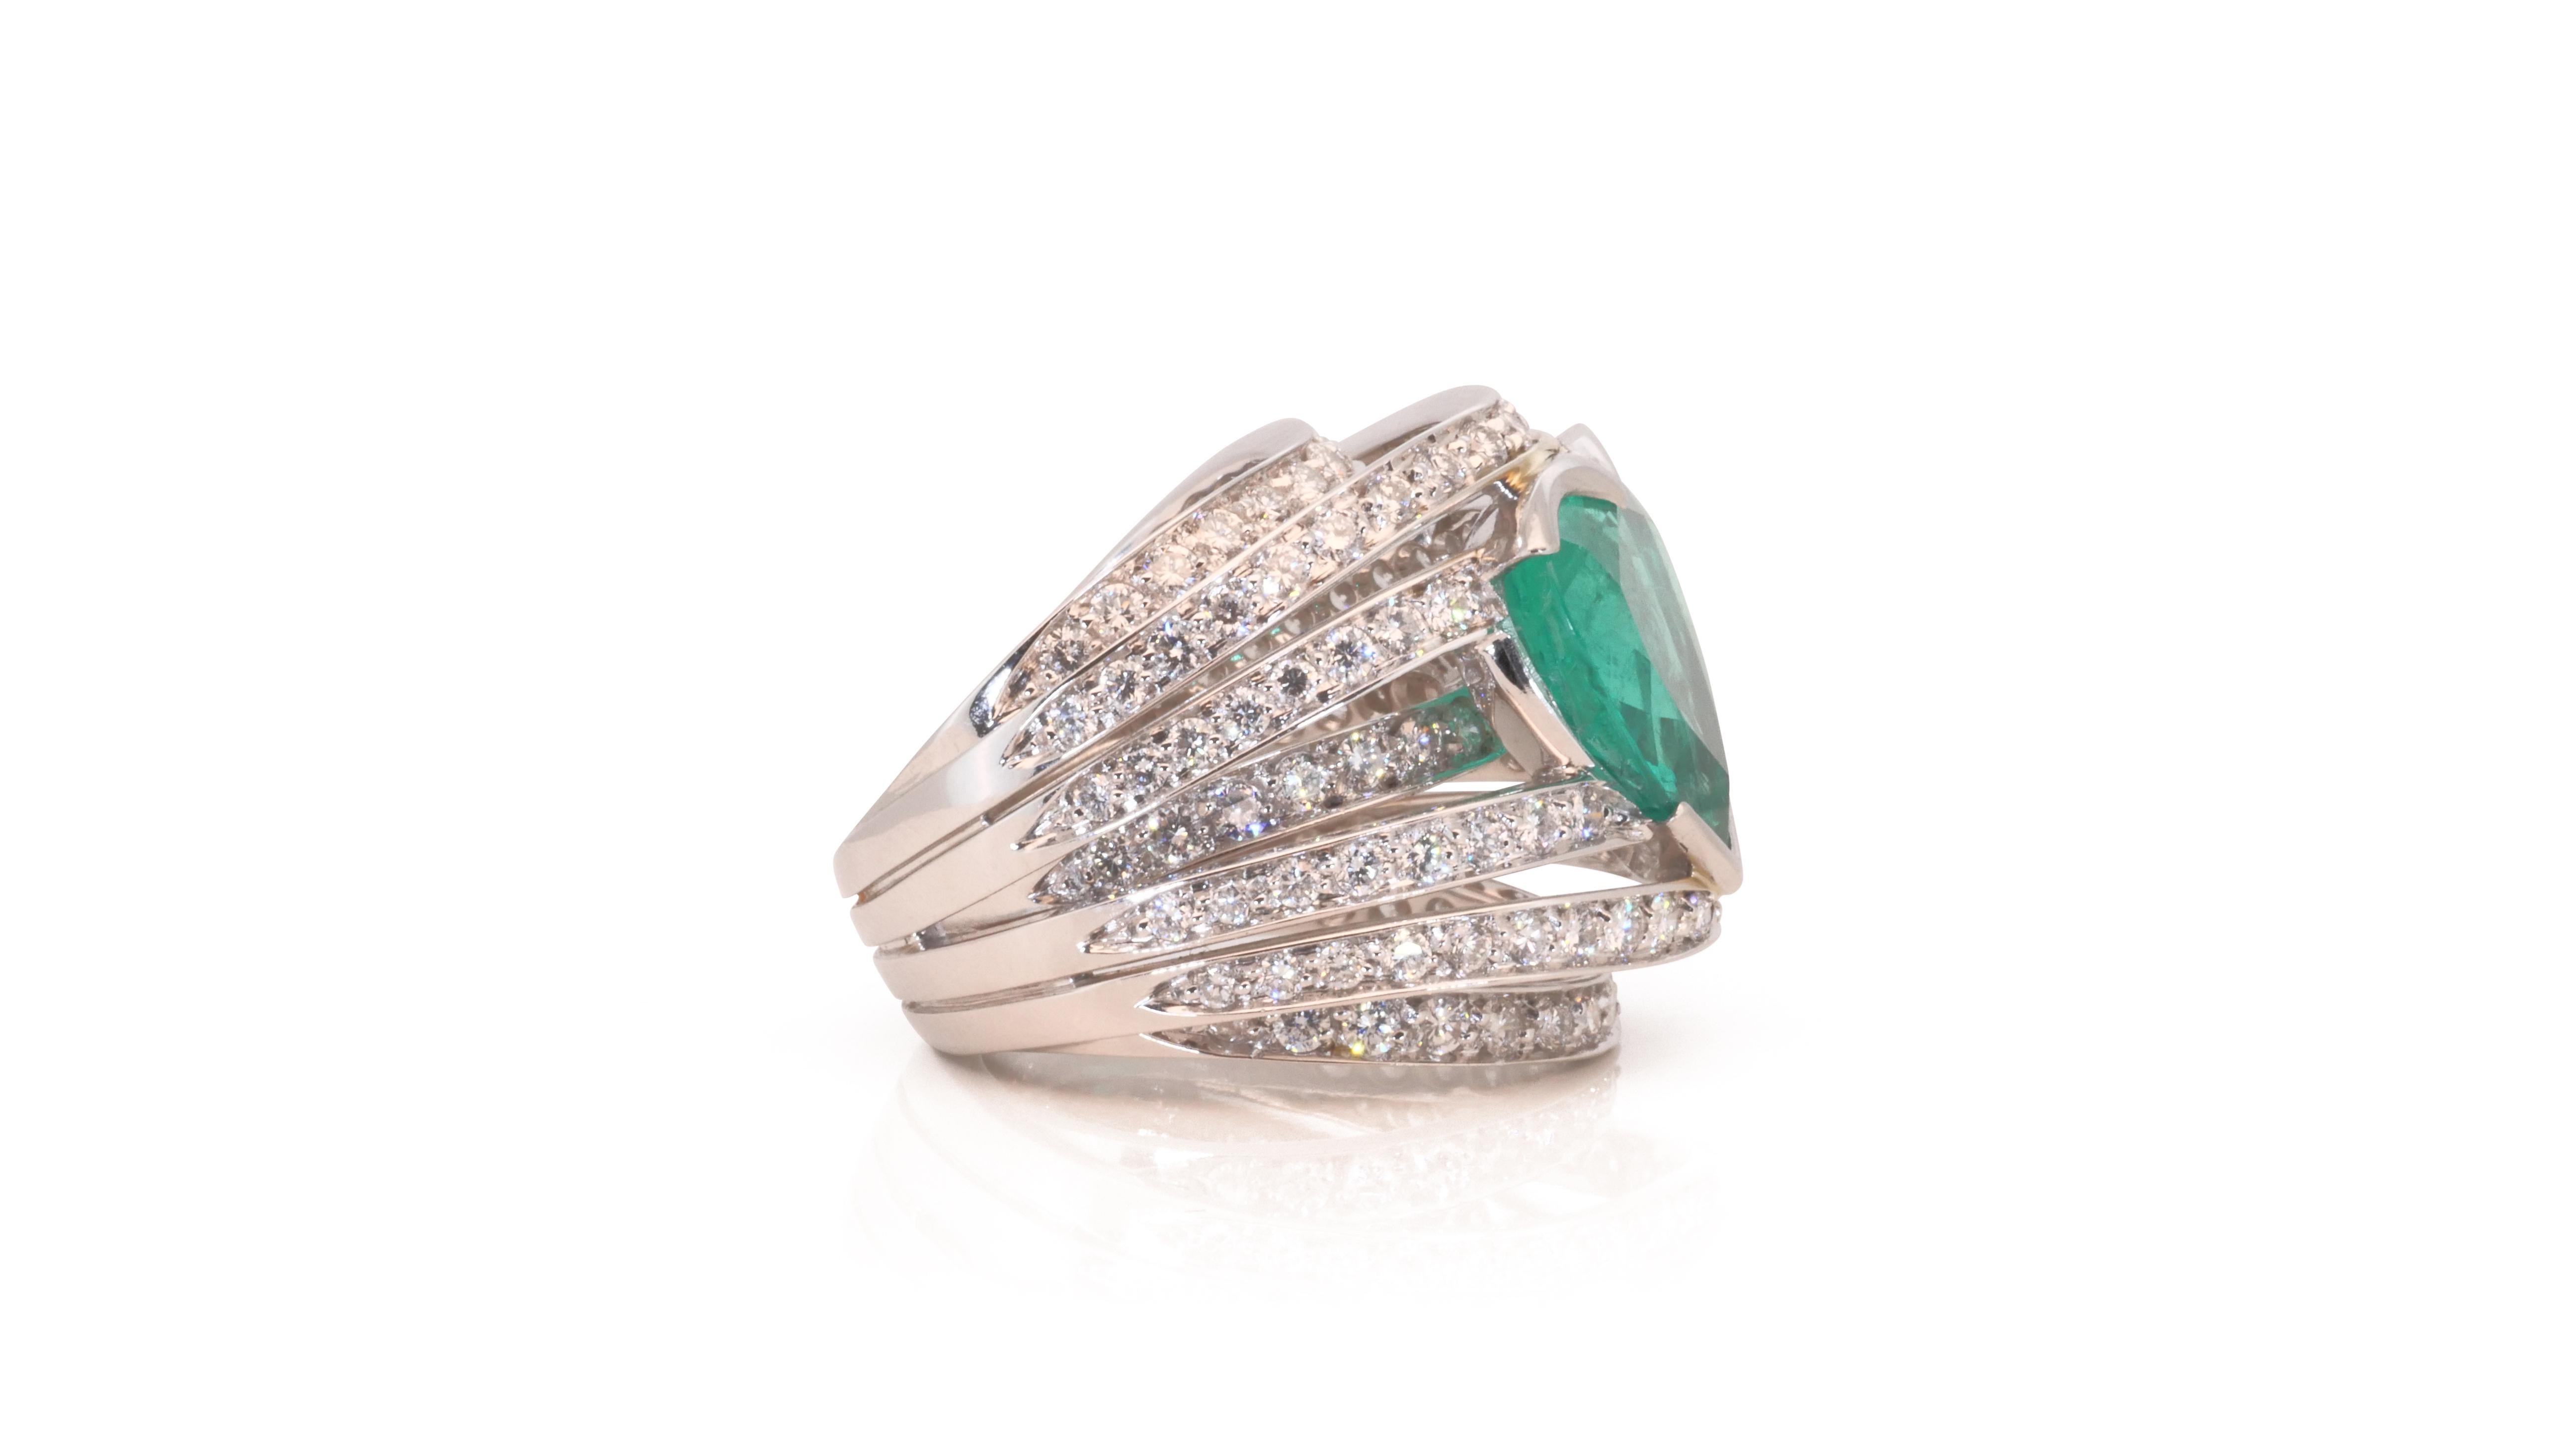 18k White Gold Heart Dome Ring 8.51 Carat Natural Emerald and Diamonds Grs Cert For Sale 3